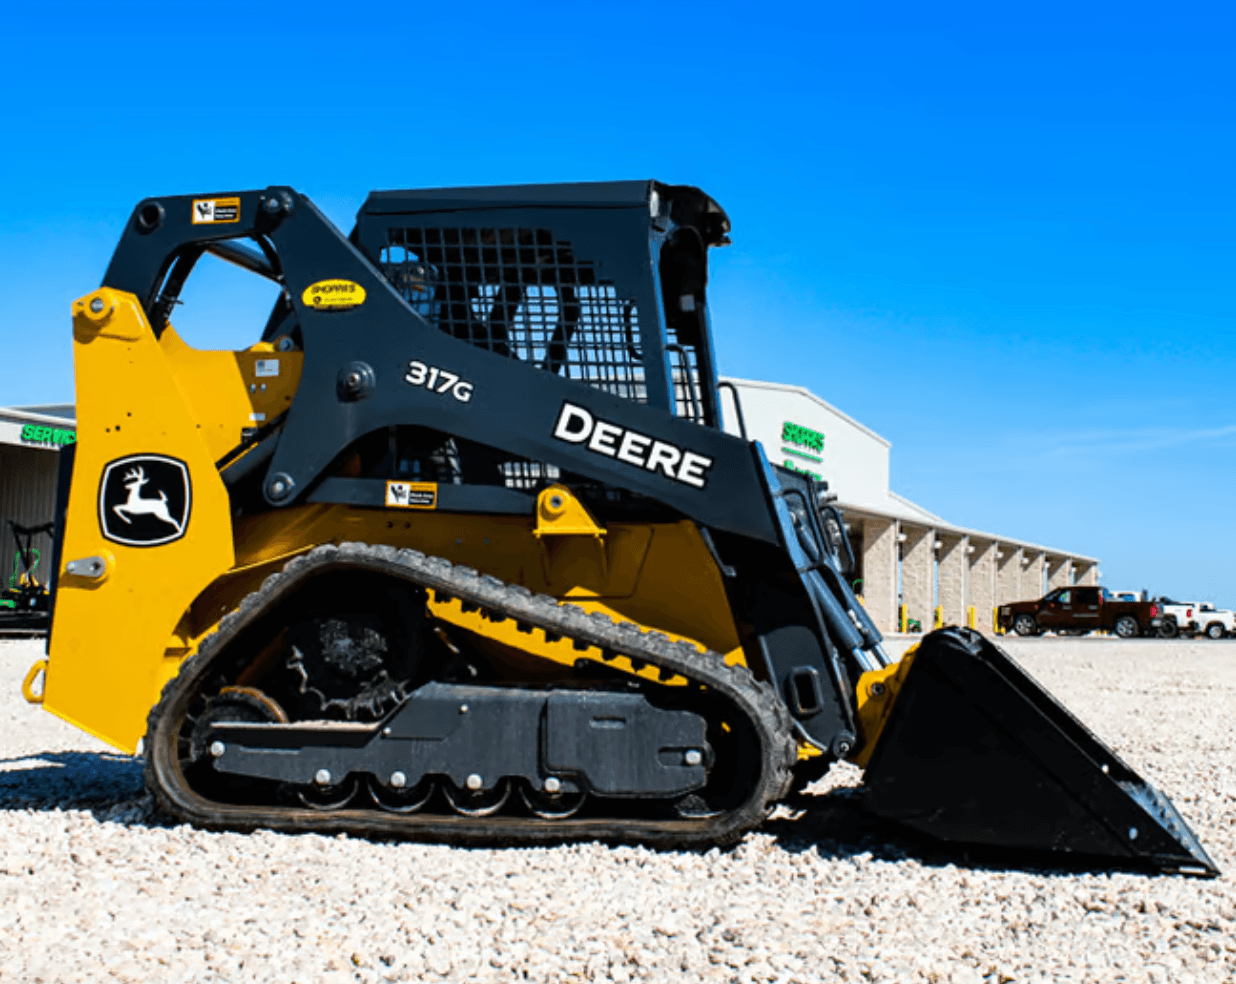 317g track loader scooping gravel on a construction site